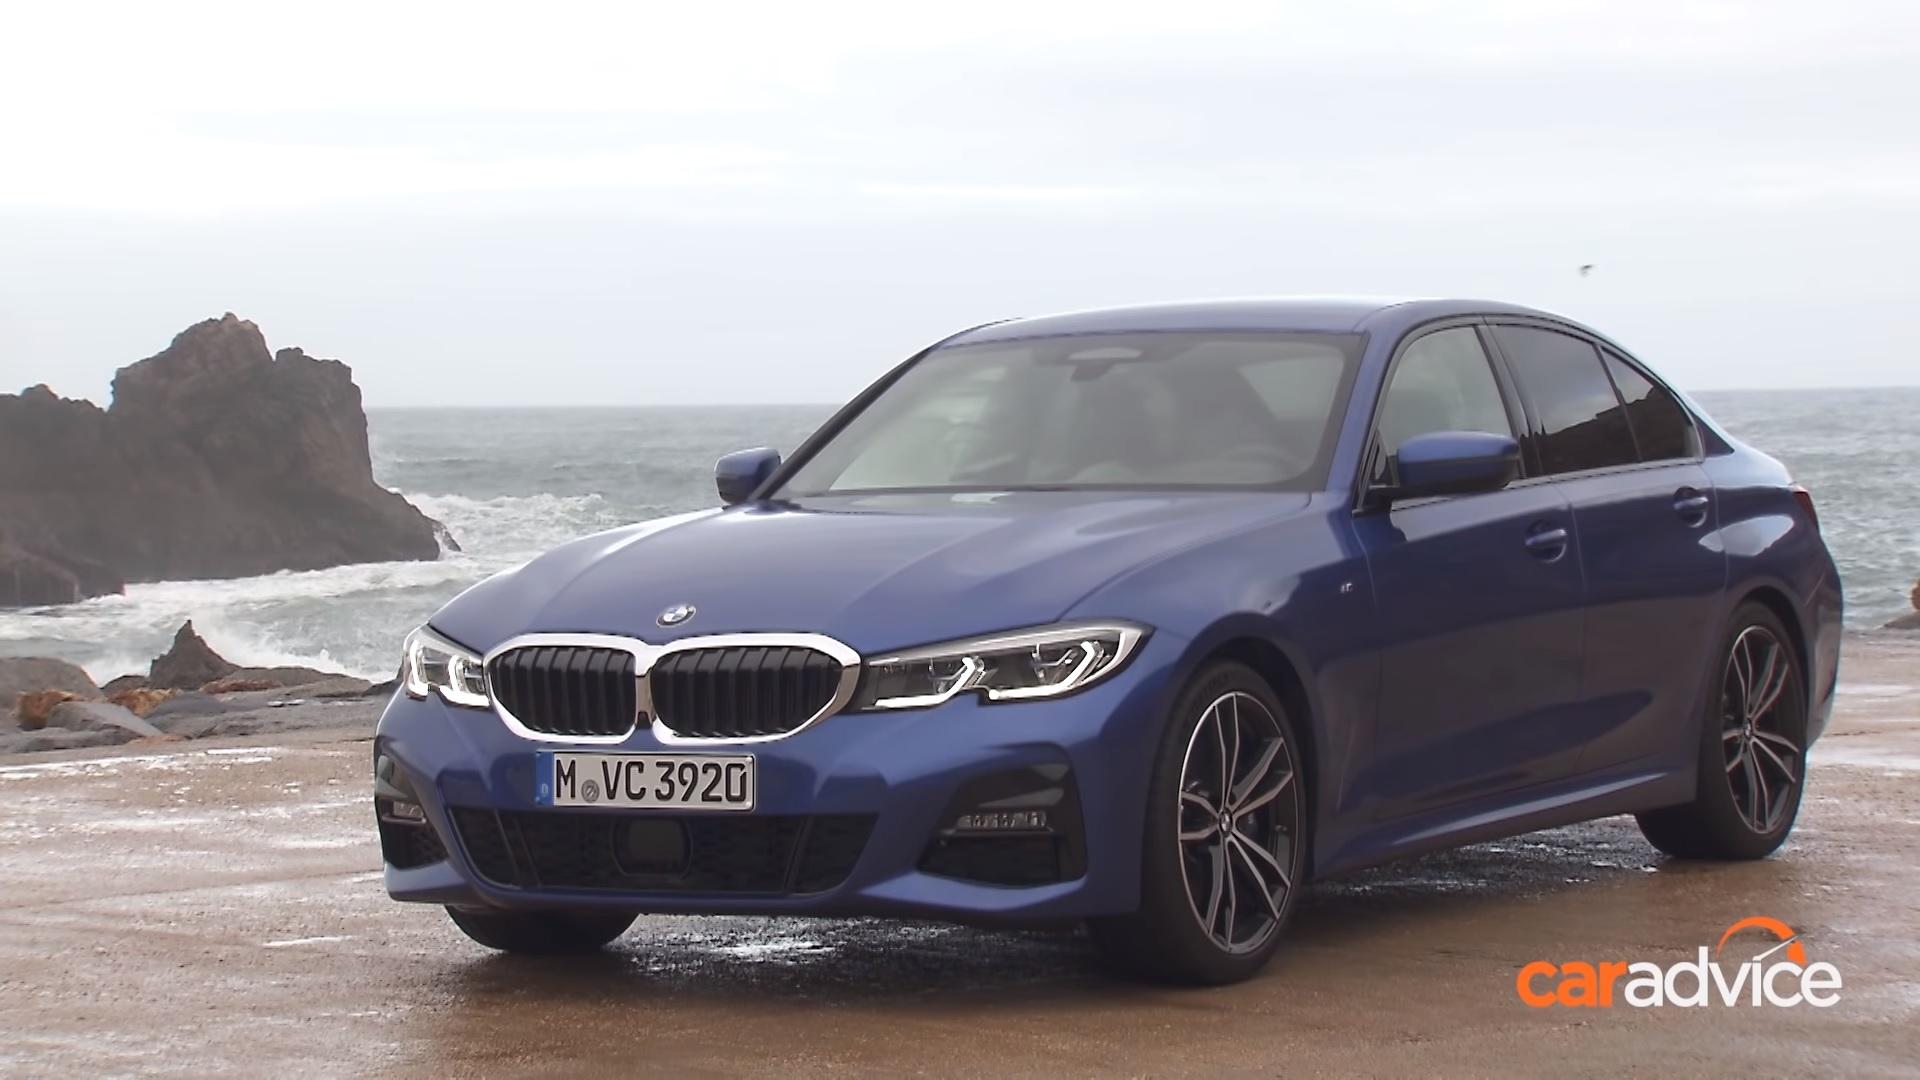 BMW 3 Series Review Roundup: Does It Get The Class Crown